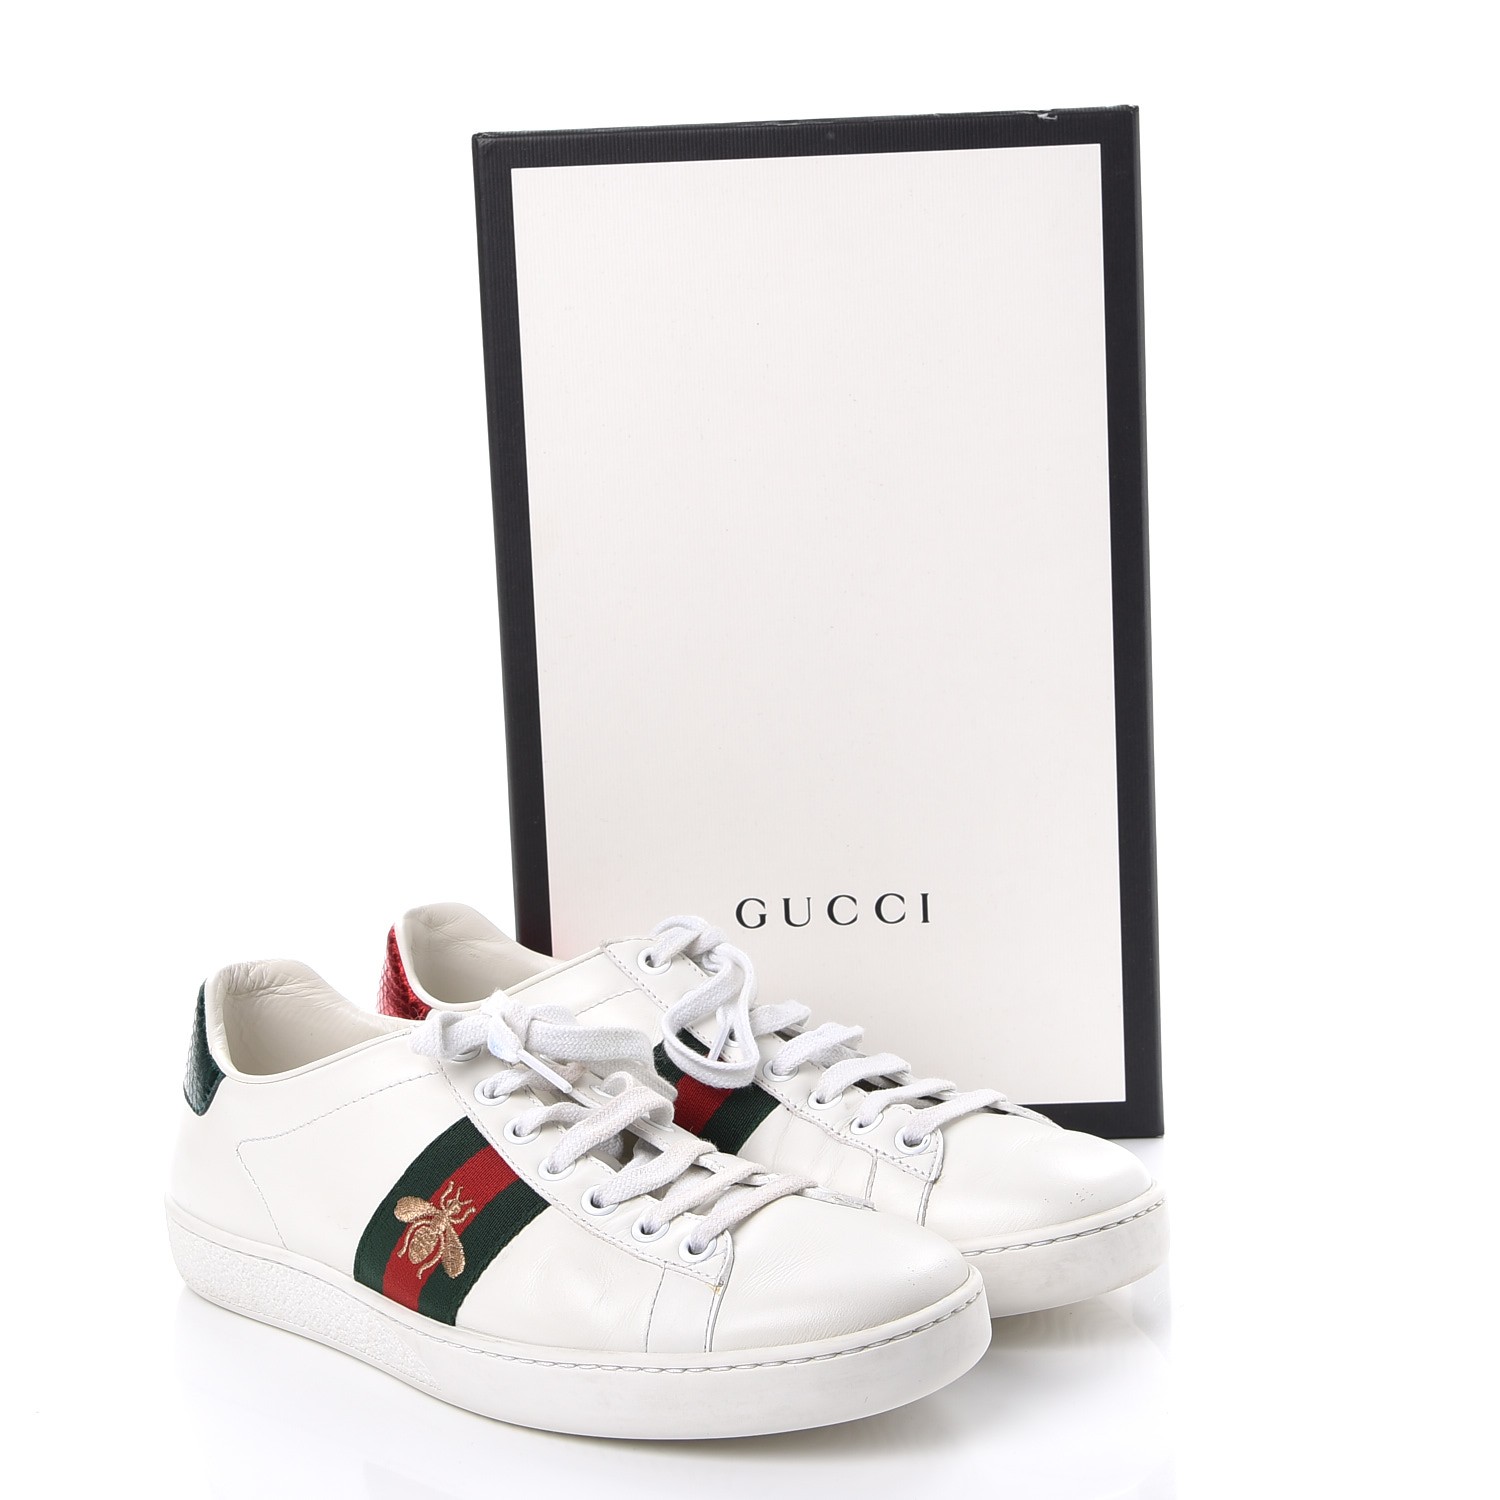 GUCCI Ayers Embroidered Ace Bee Star Sneakers 37.5 White Green 251075 ...